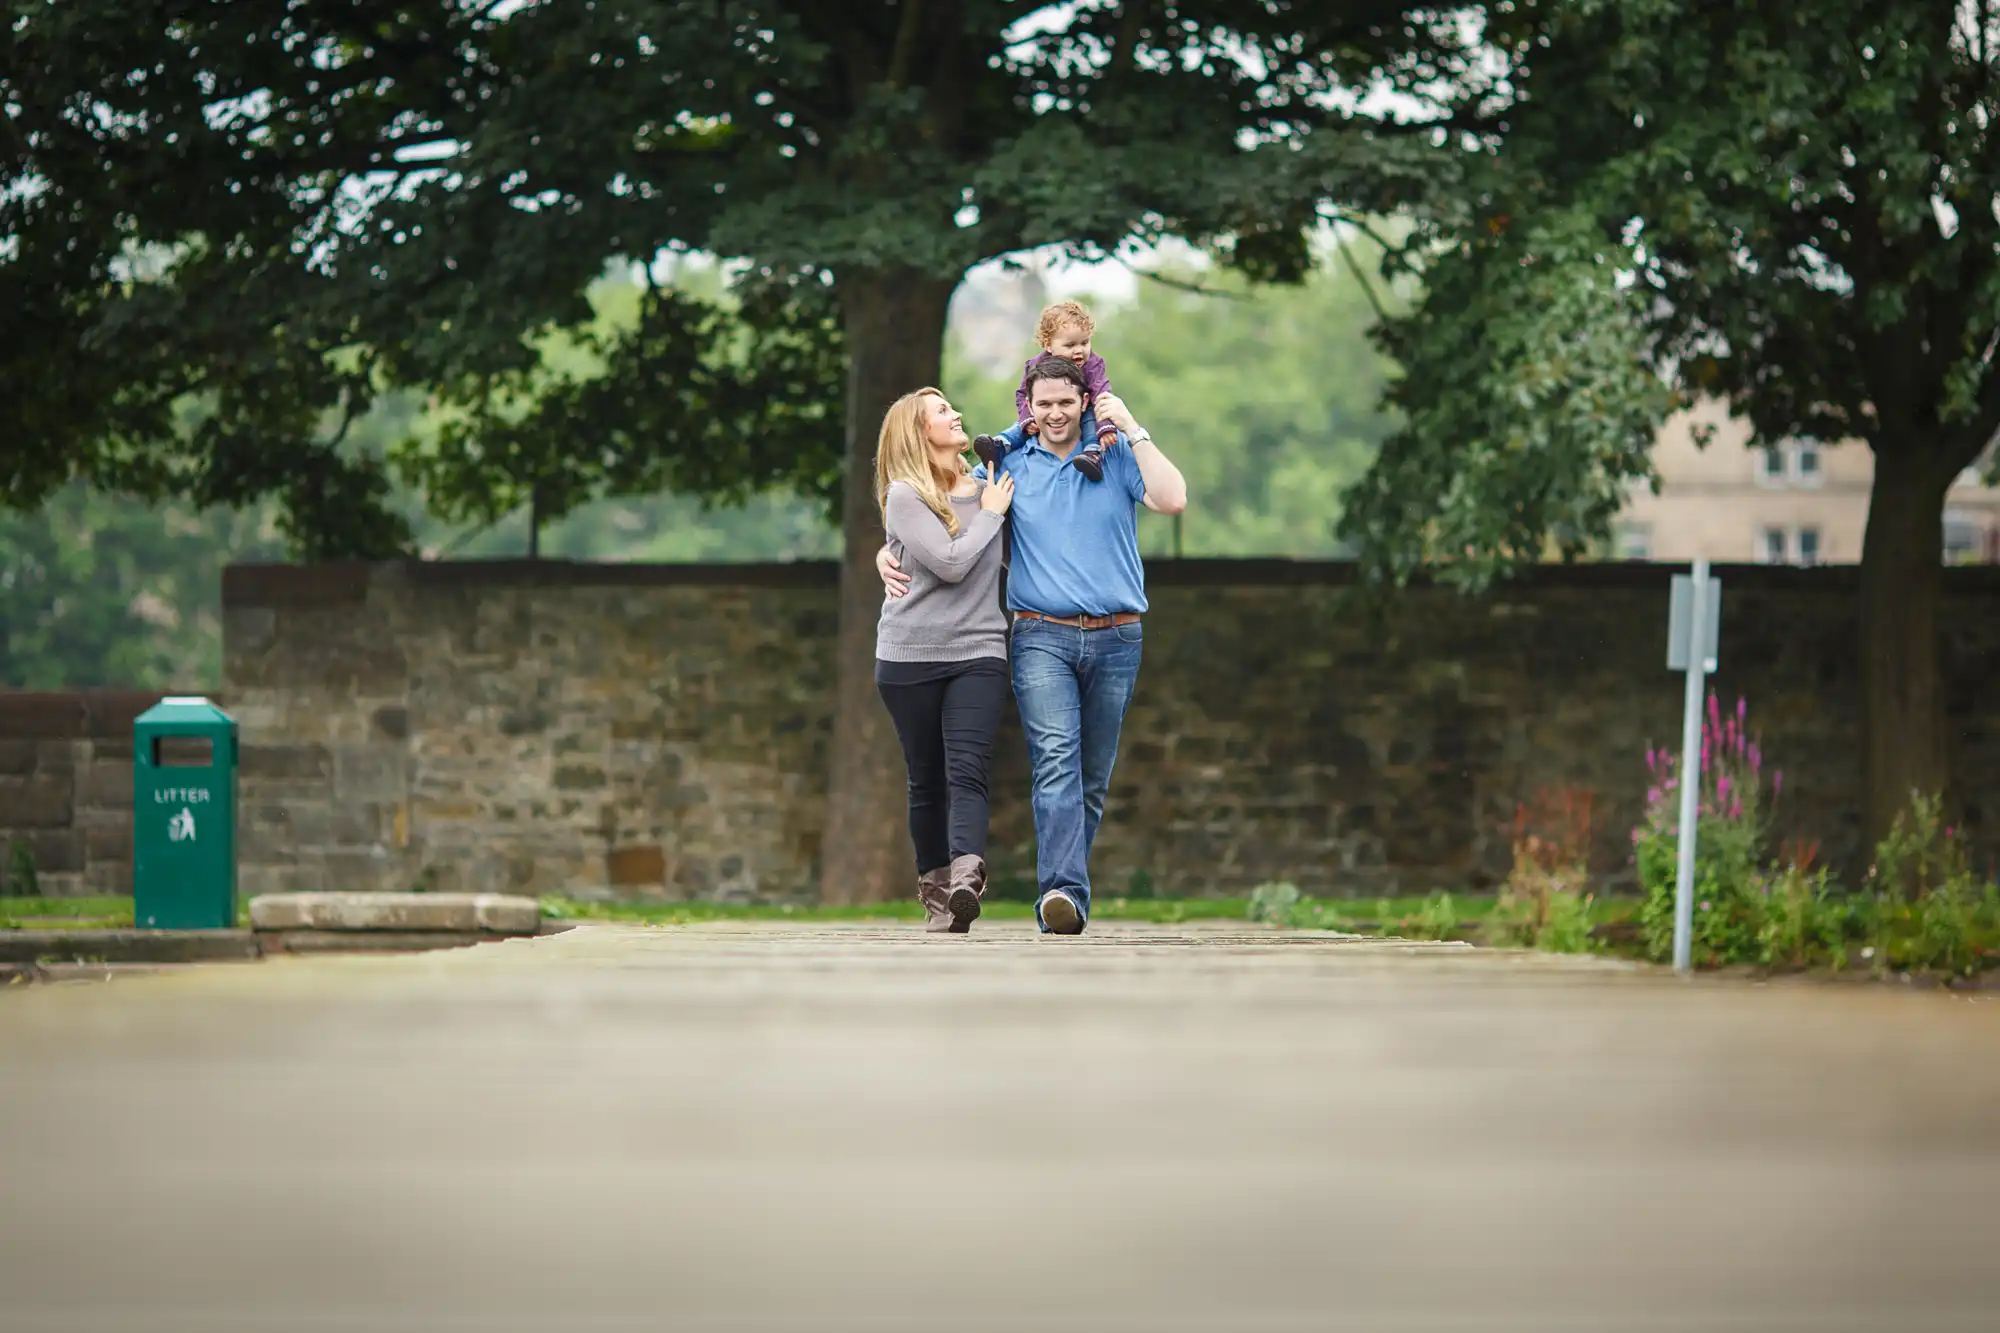 A joyful couple running towards the camera on a paved path, with the woman piggybacking on the man, in a lush park setting.